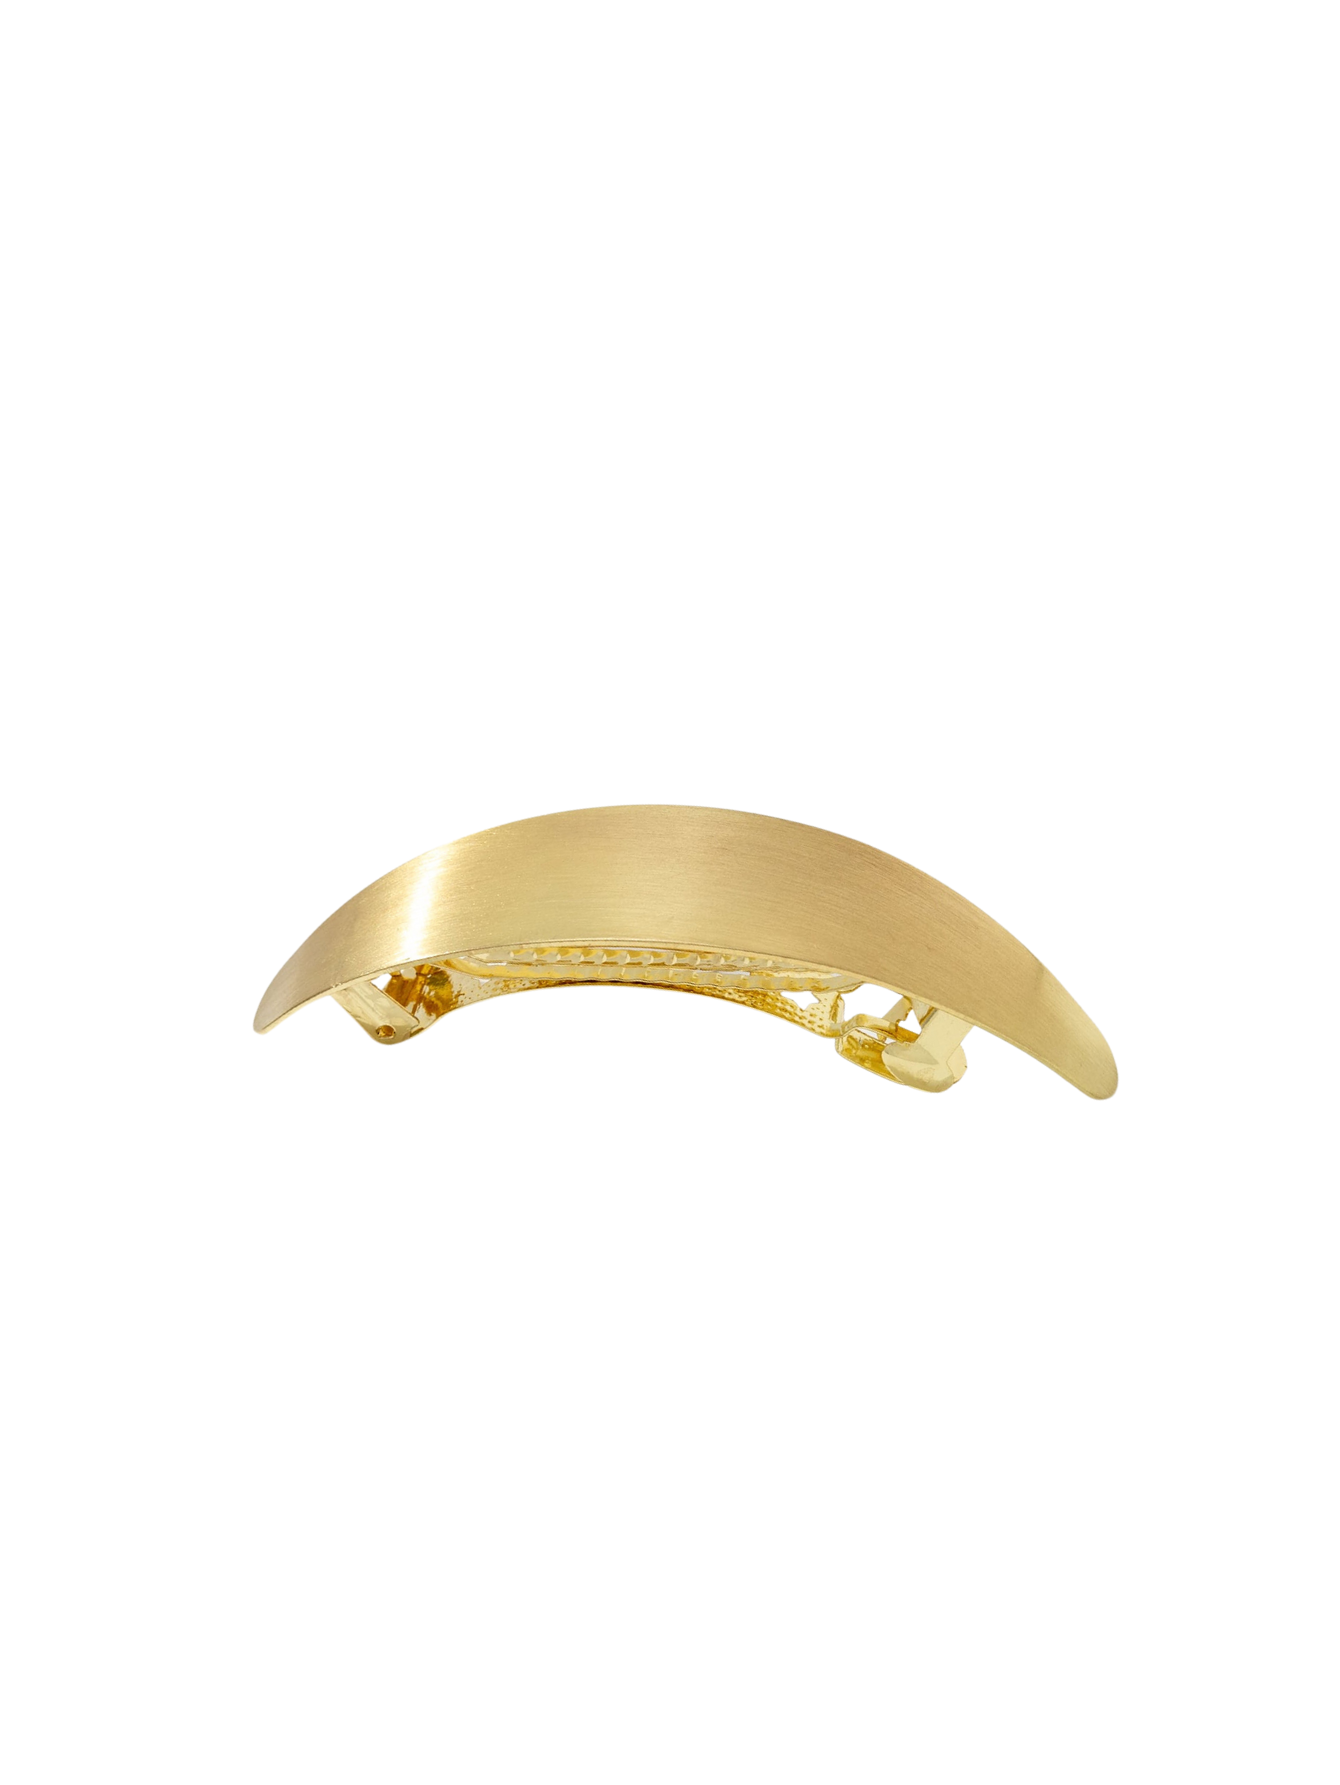 The Stella Gold Clamp